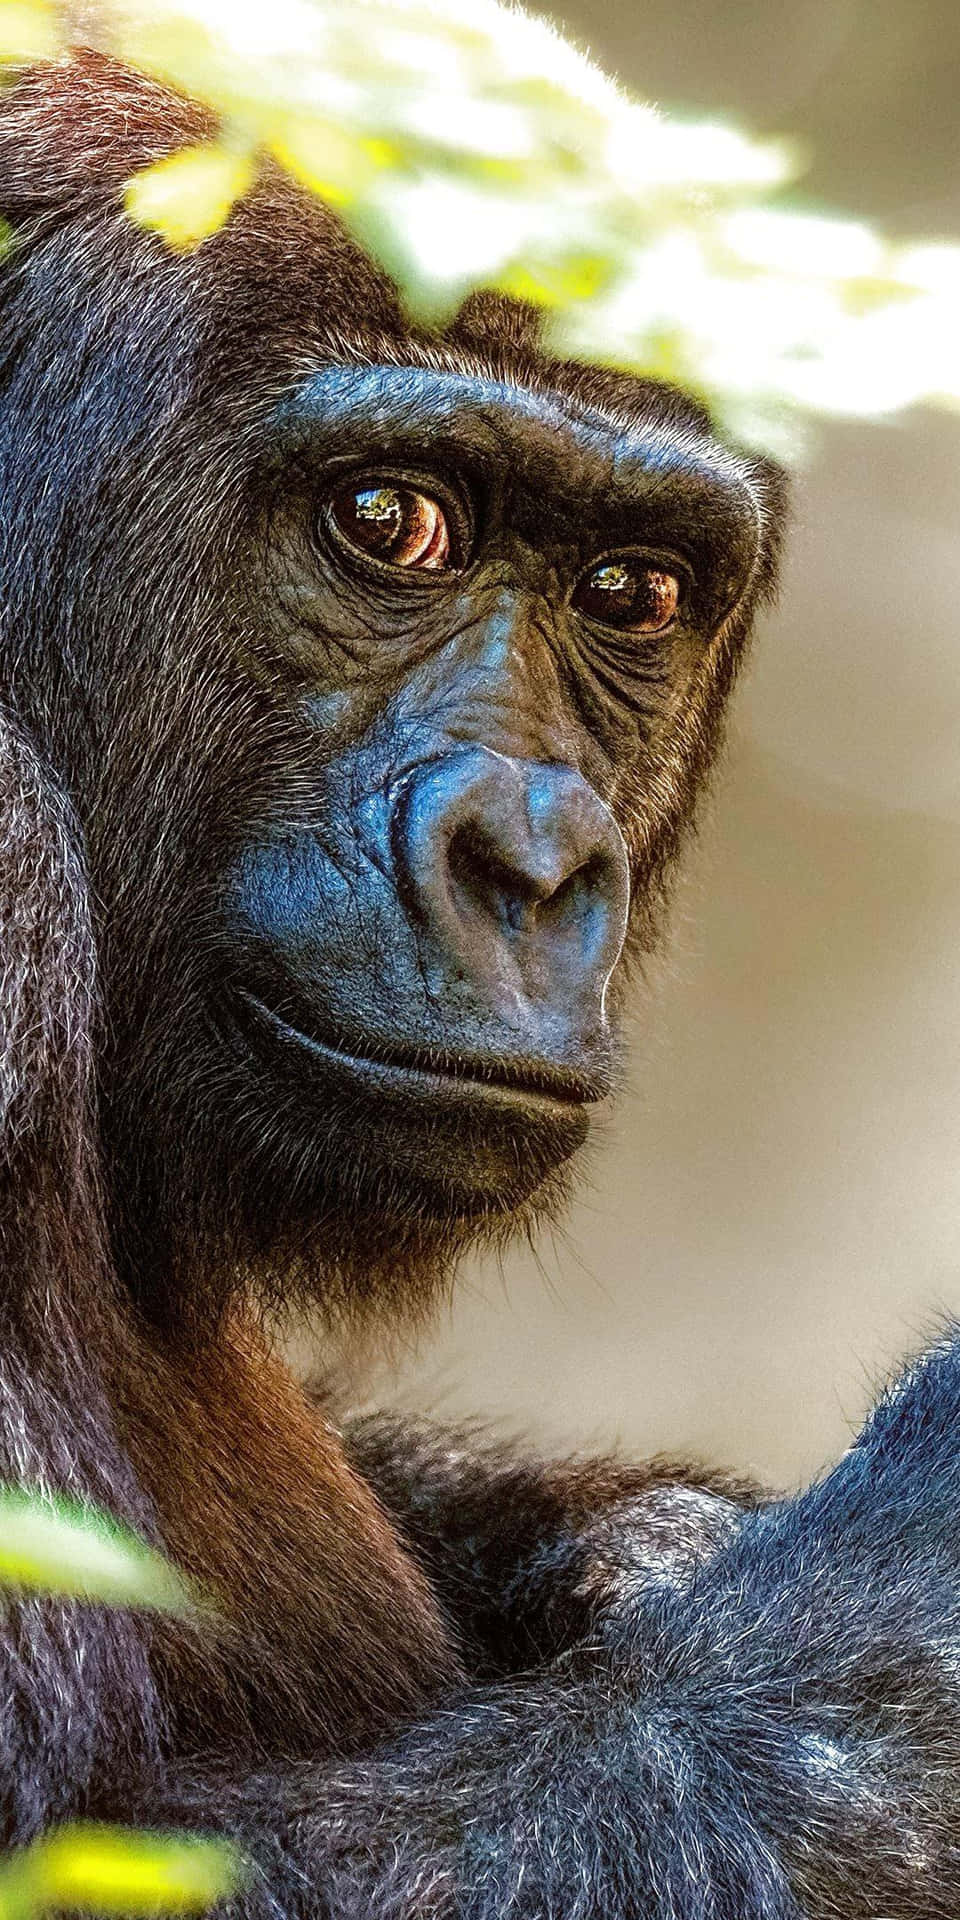 King Of The Jungle: Majestic Gorilla In Pensive Thought